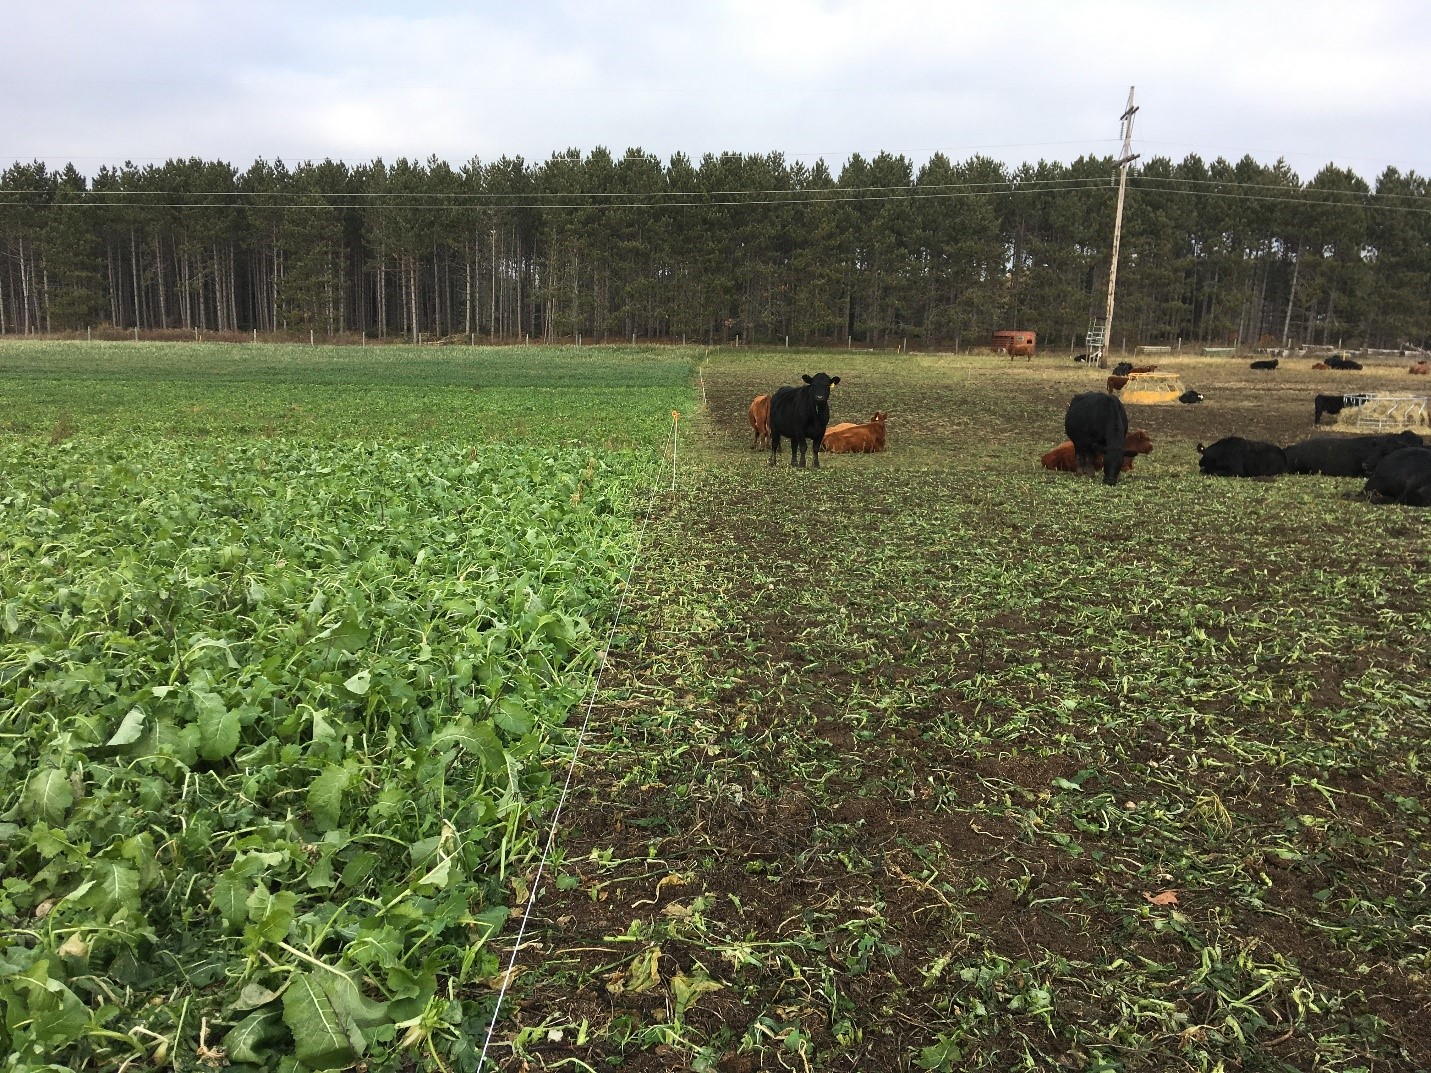 Cows grazing in cover crops